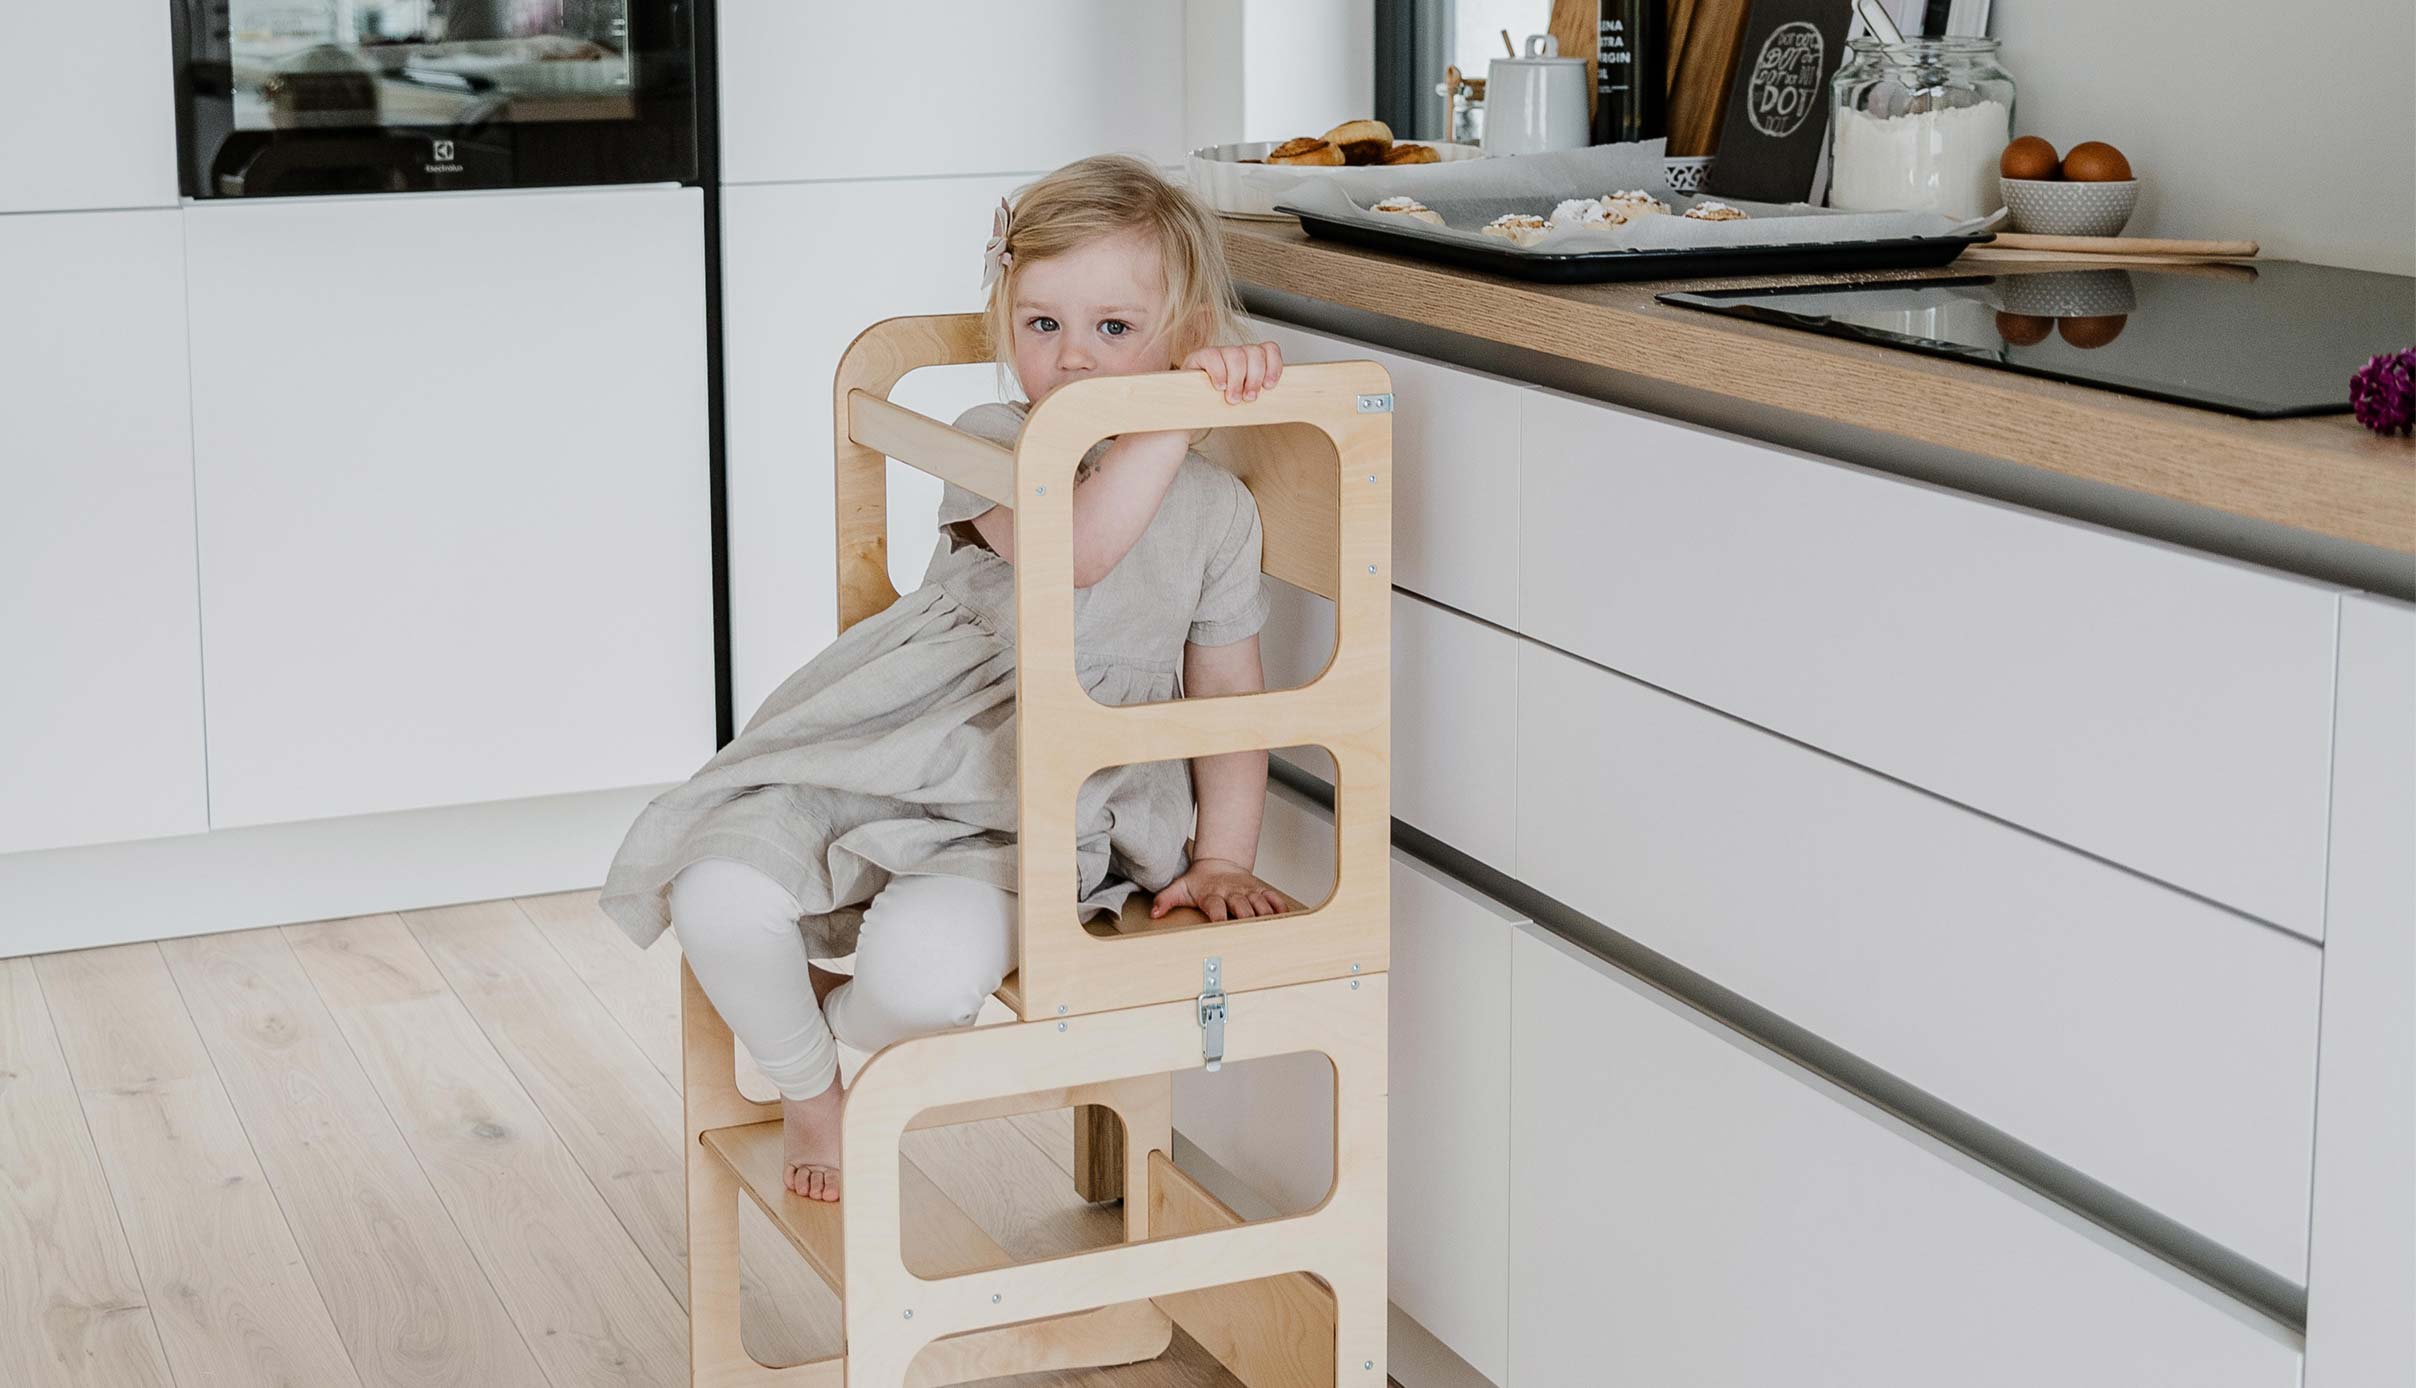 A little girl sitting on a wooden high chair in a kitchen.